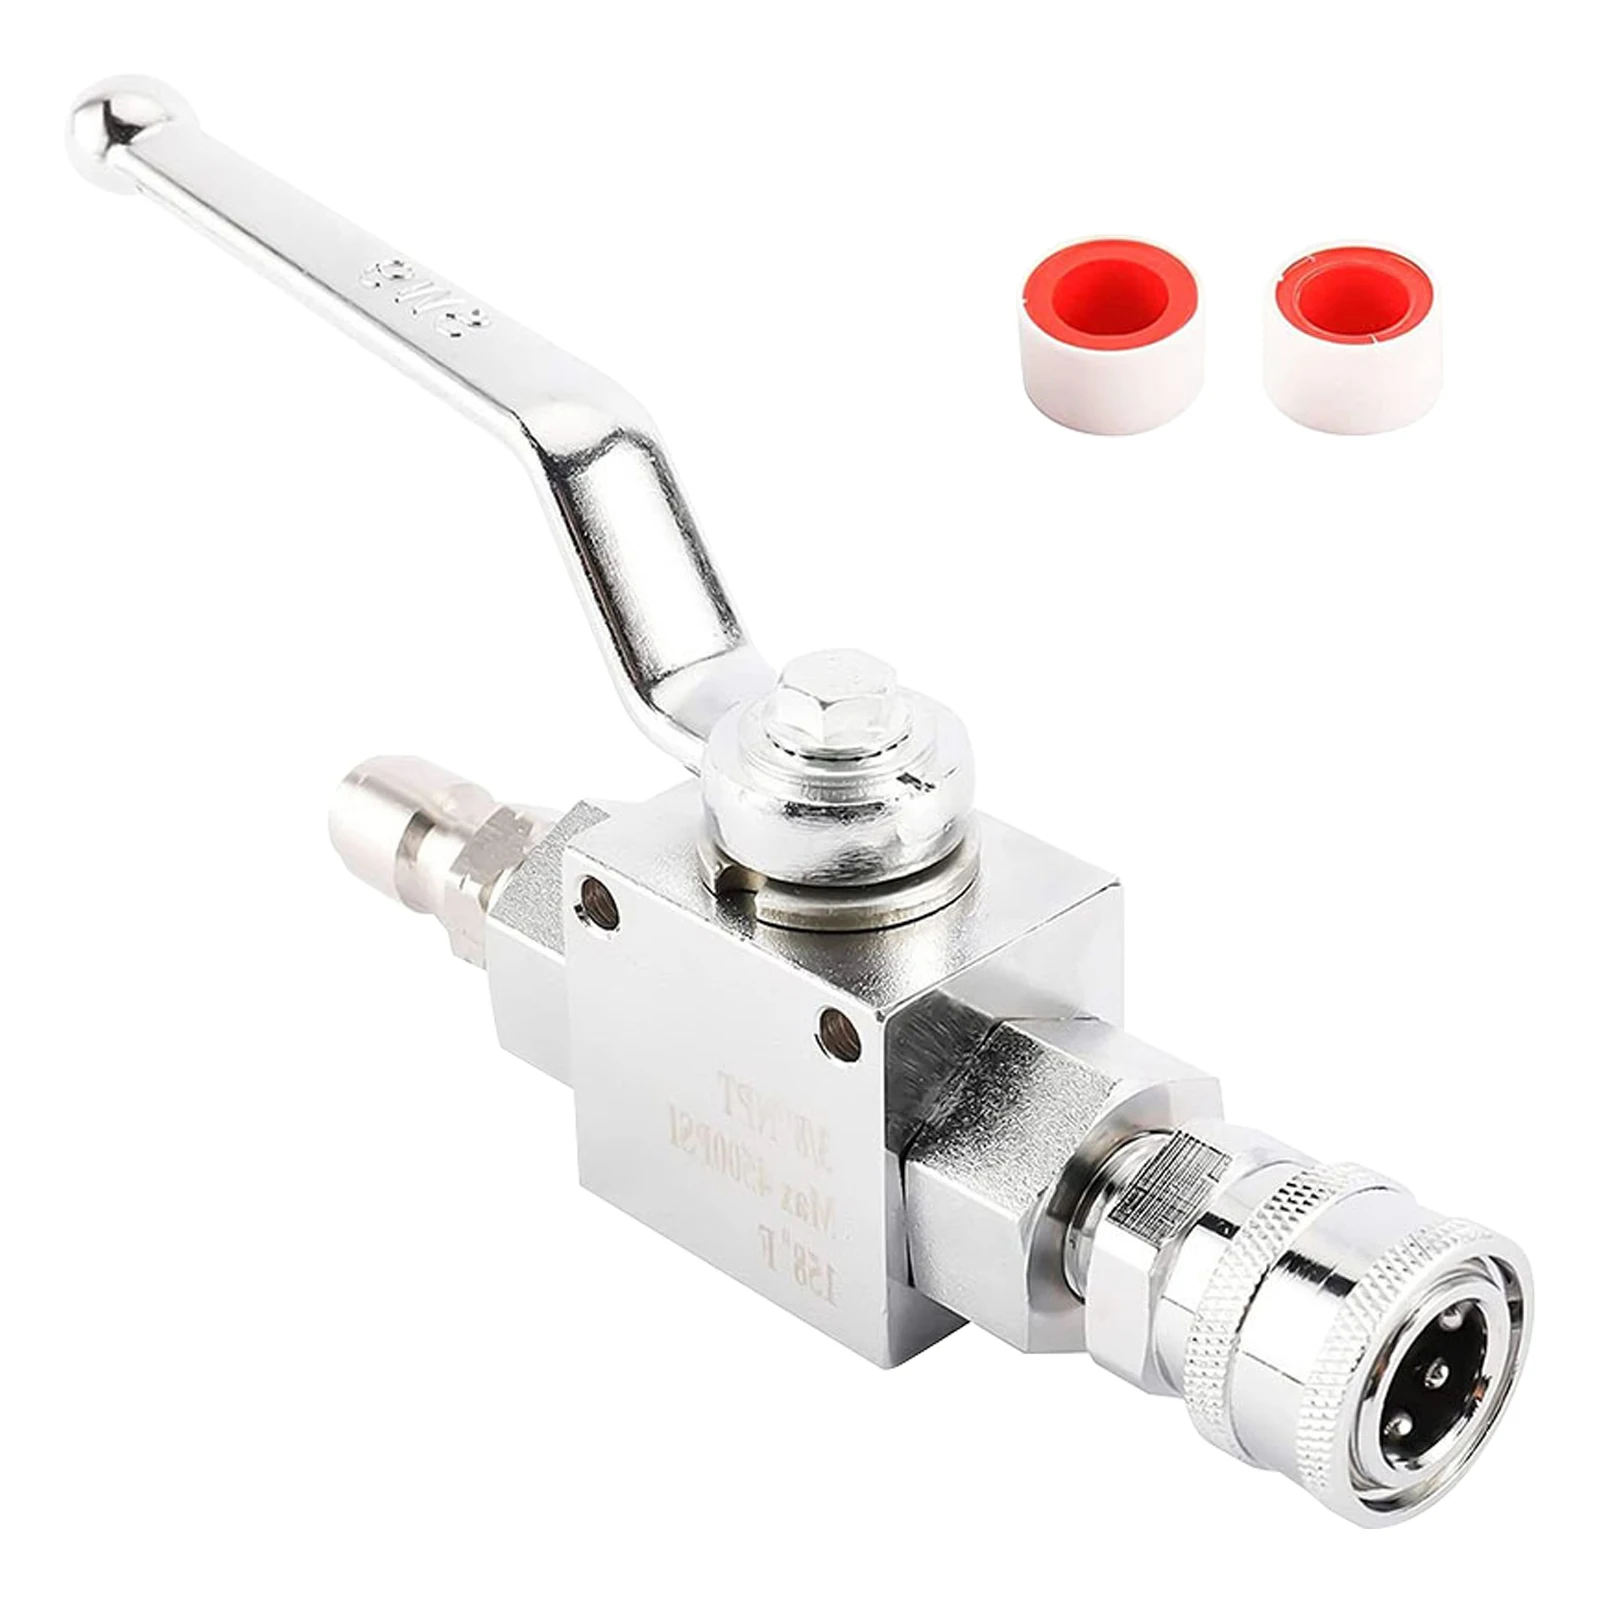 

Stainless Steel Ball Valve Kit Power Durable Quick Connect Fittings Easy To Use Pressure Washer Convenient Sturdy Wear Resistant